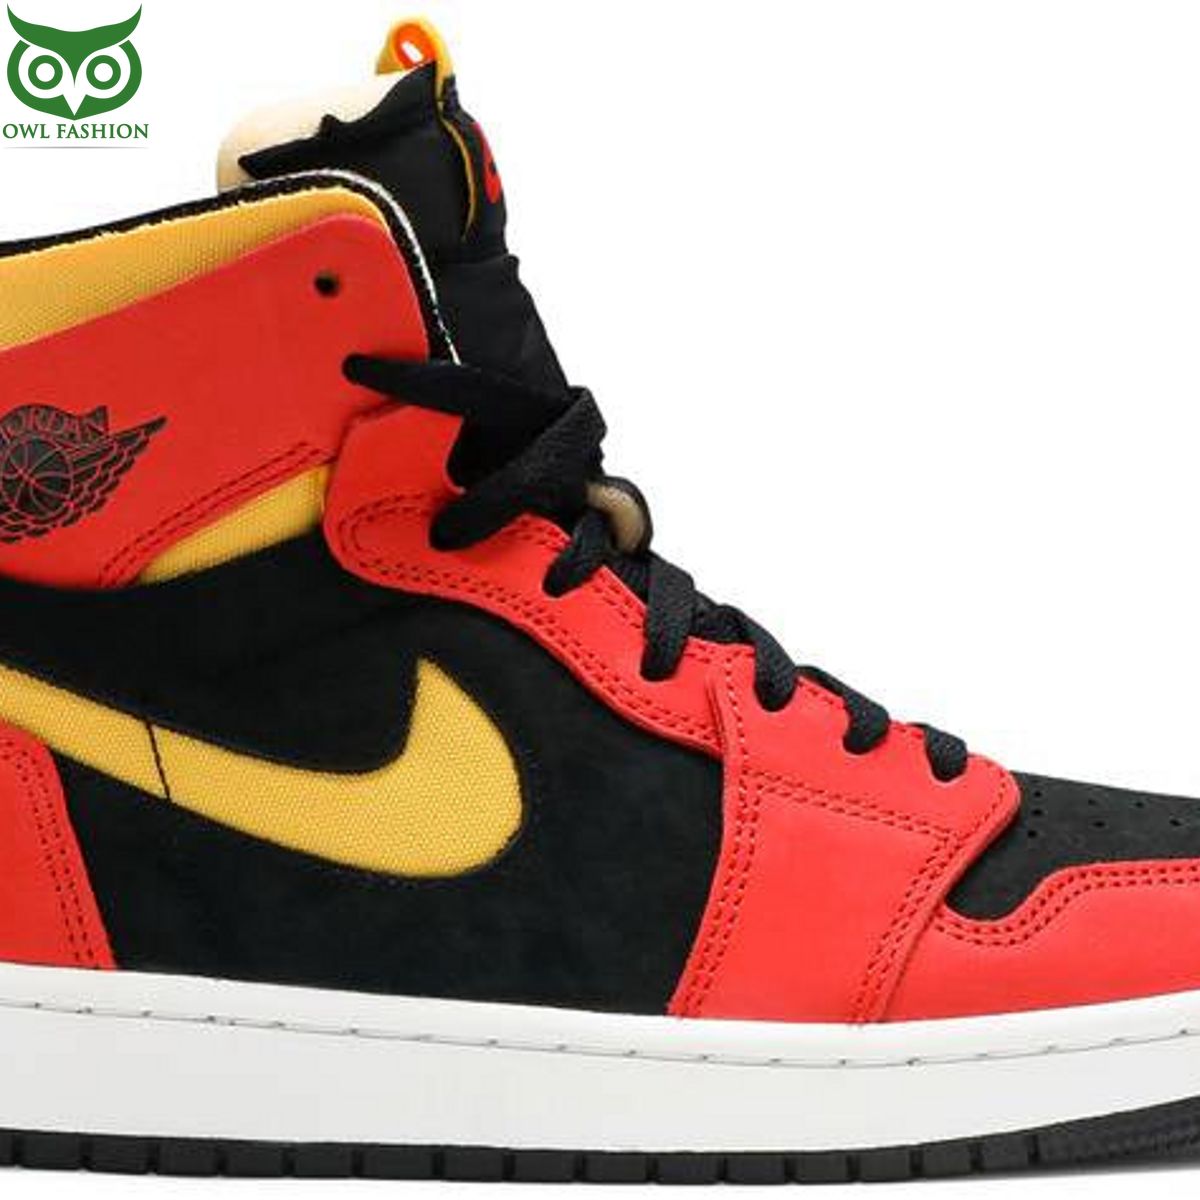 High Zoom Comfort Chile Red Hot Air Jordan 1 You look cheerful dear